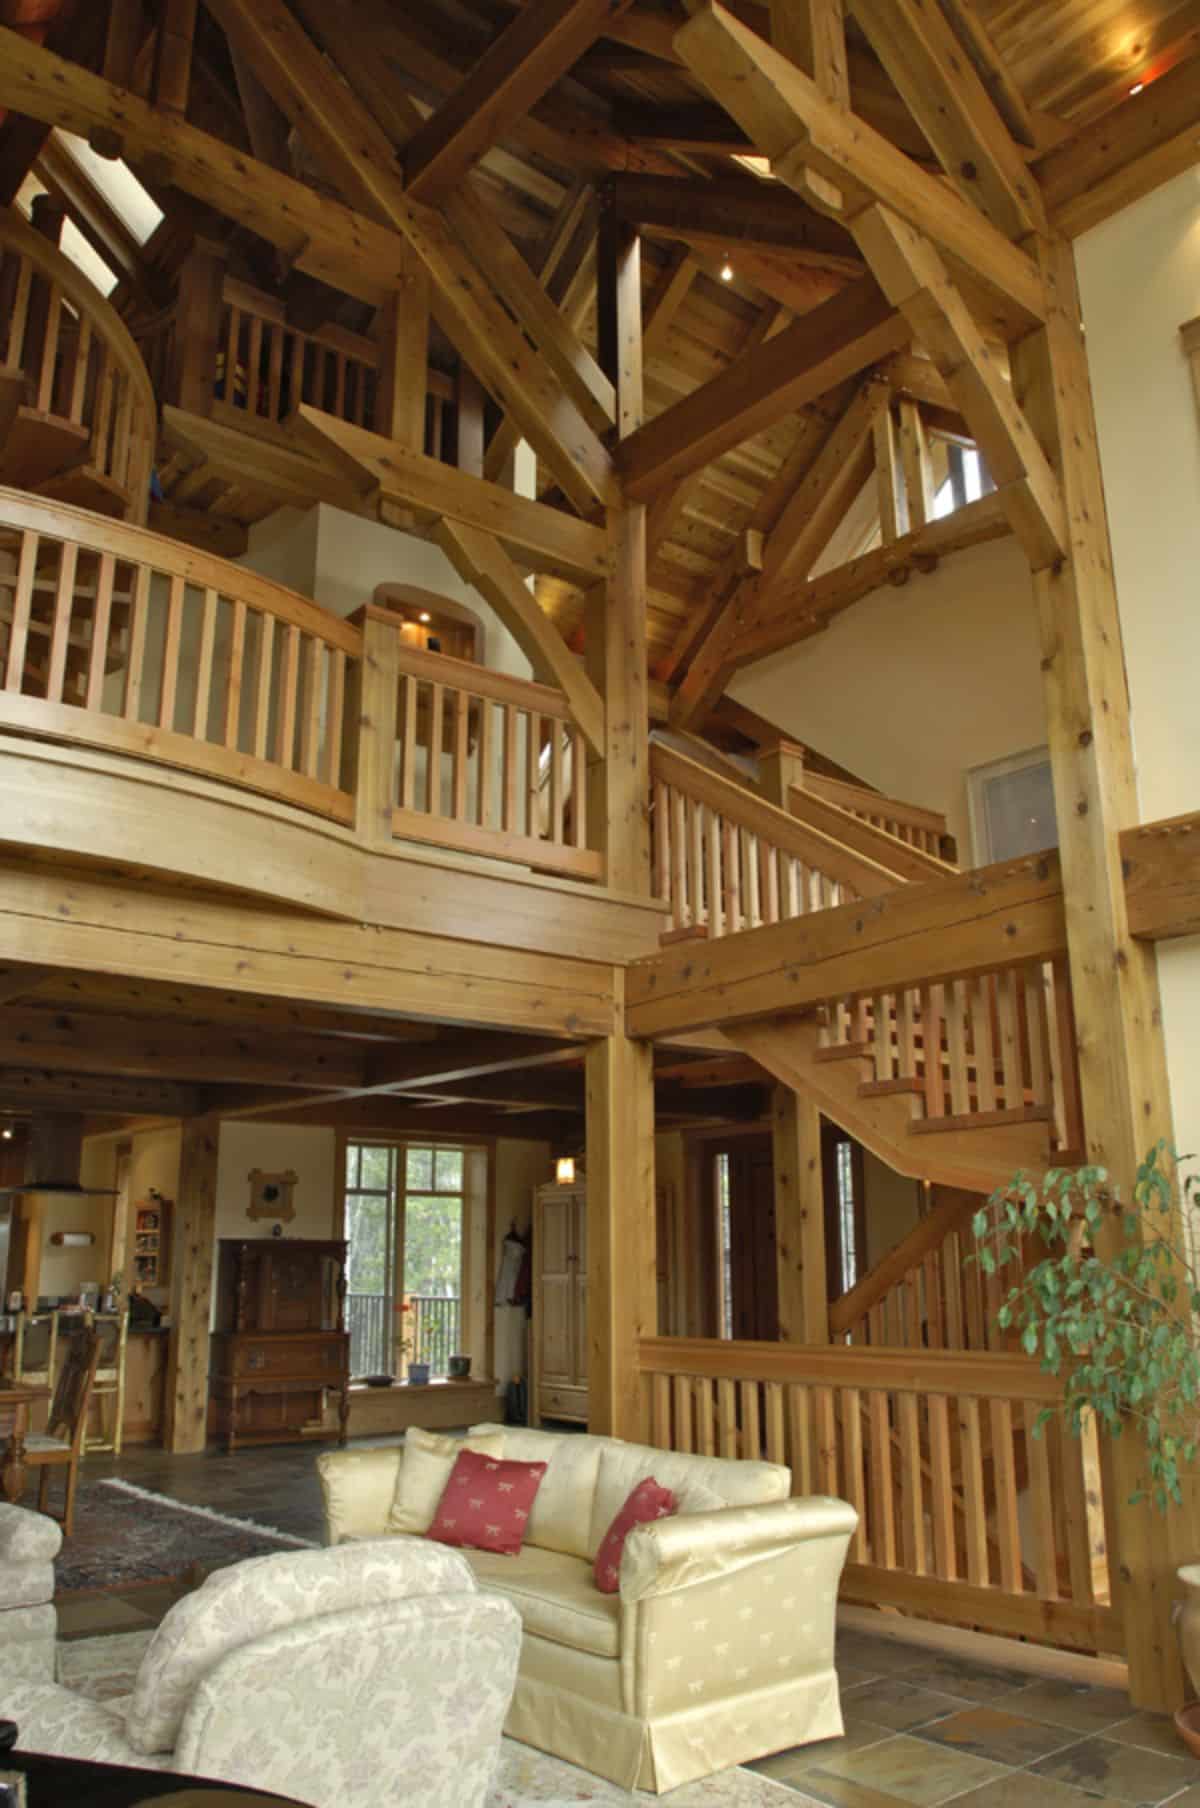 railing along upper loft landing and stairs from main floor in background on right